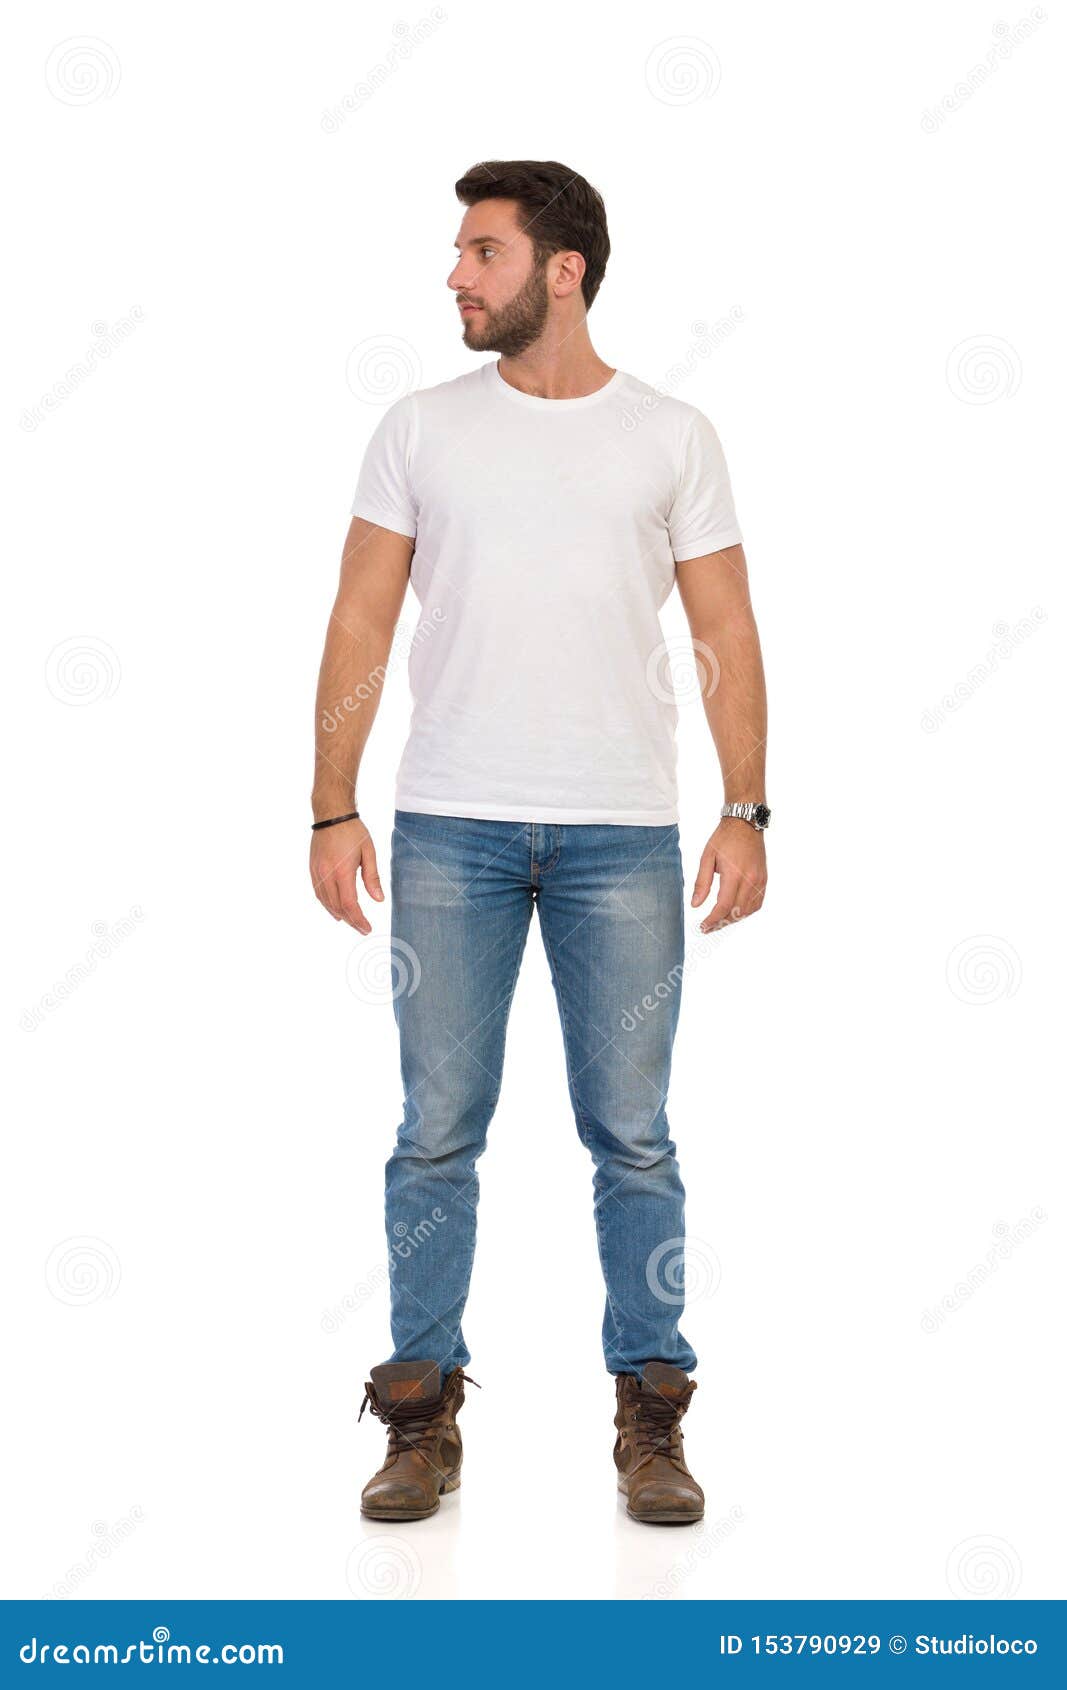 Serious Man in Jeans and White T-shirt is Standing and Looking Away. Front  View Stock Image - Image of shirt, confidence: 153790929